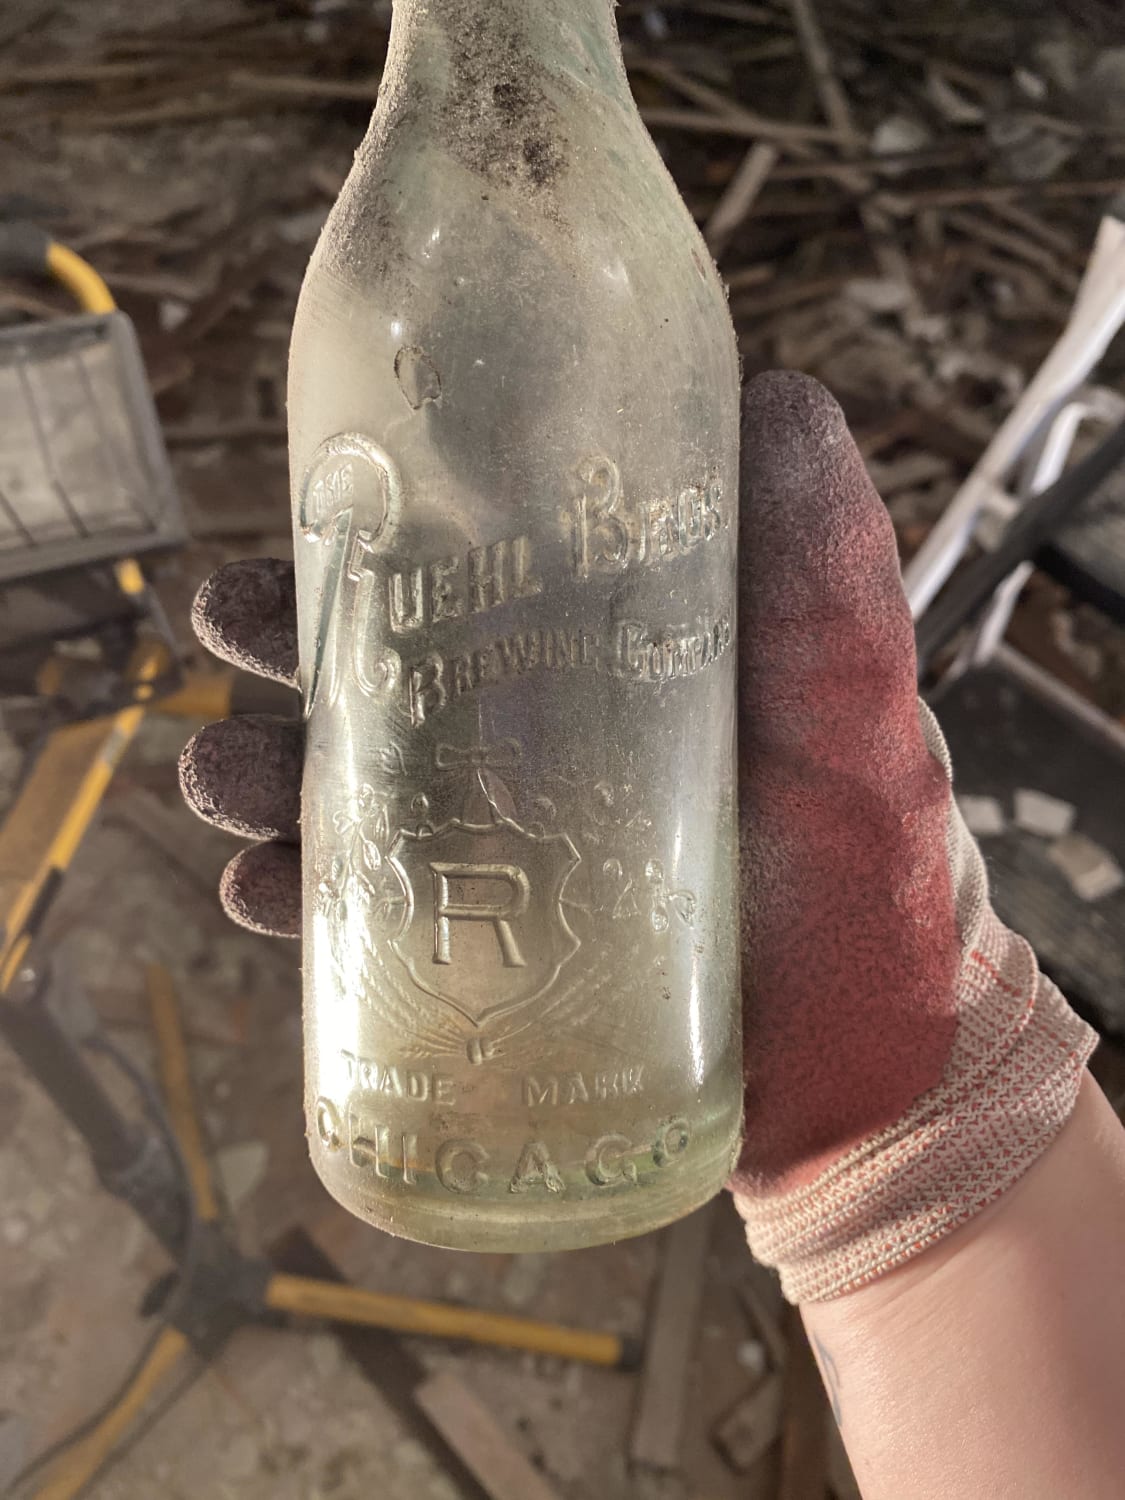 Old bottle from Ruehl Bros. brewery in Chicago I found behind a wall during our demo in our master bedroom. According to google, brewery existed from 1915-1926.